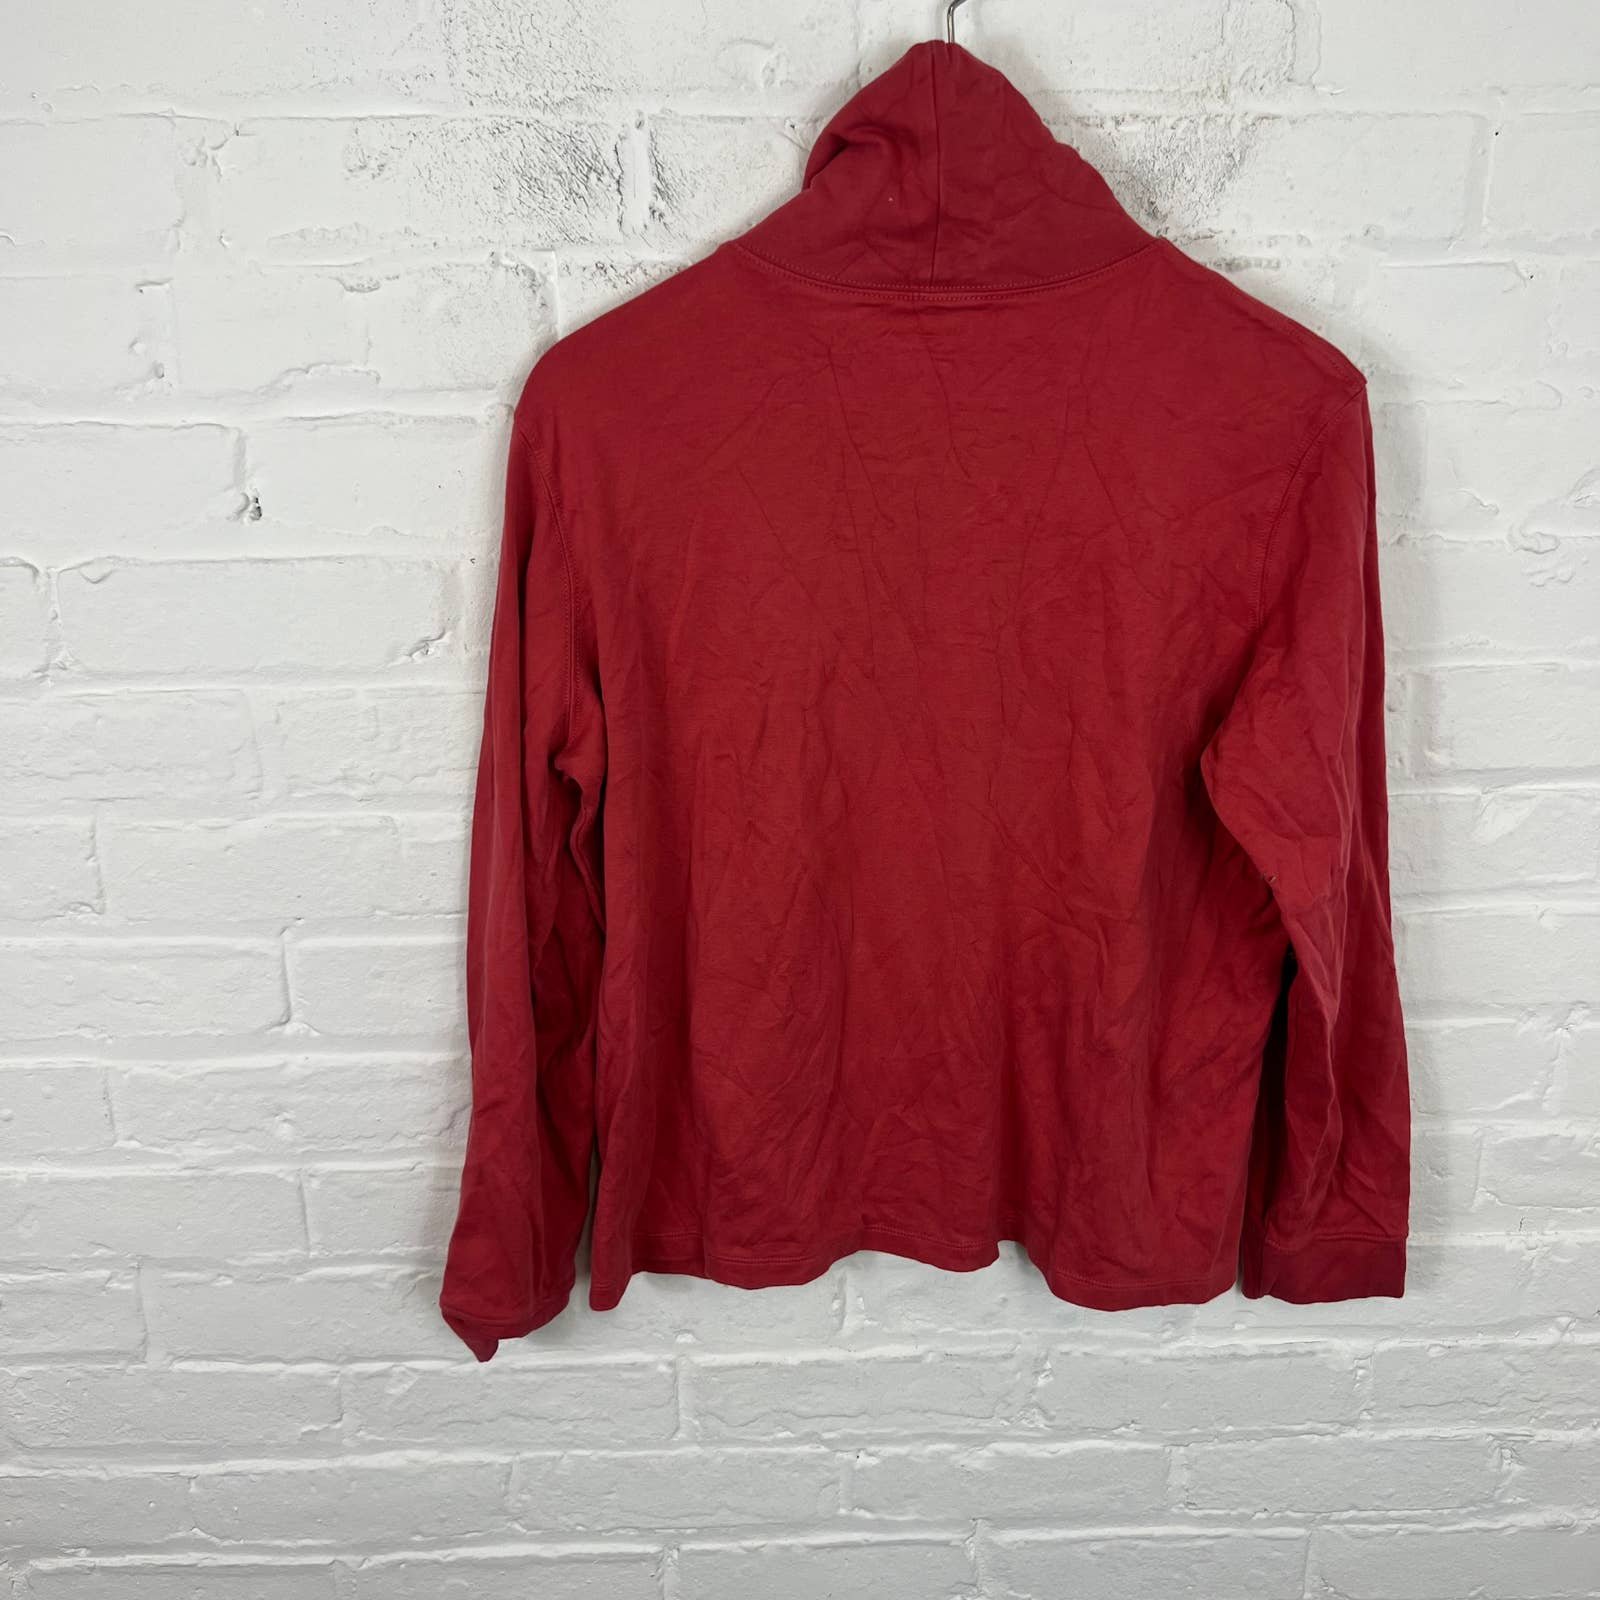 Promotions  L.L. Bean Women´s Turtleneck Pullover Sweater Long Sleeve Solid Red Size XLP fPBrz2Gc3 Discount